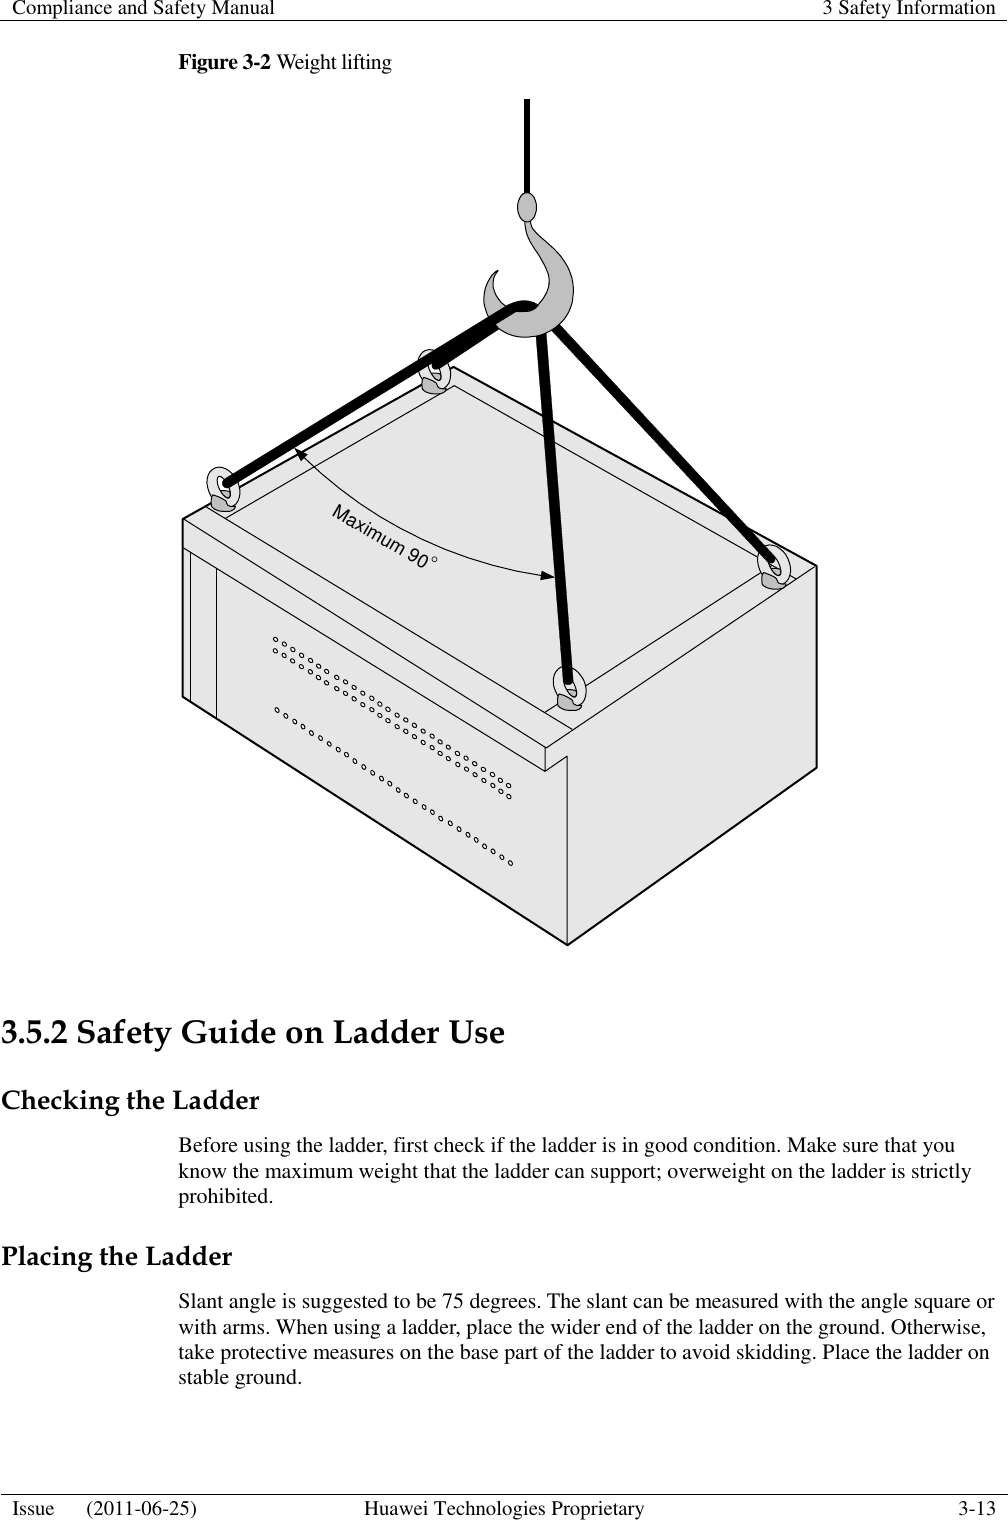 Compliance and Safety Manual 3 Safety Information  Issue      (2011-06-25) Huawei Technologies Proprietary 3-13  Figure 3-2 Weight lifting Maximum 90  3.5.2 Safety Guide on Ladder Use Checking the Ladder Before using the ladder, first check if the ladder is in good condition. Make sure that you know the maximum weight that the ladder can support; overweight on the ladder is strictly prohibited. Placing the Ladder Slant angle is suggested to be 75 degrees. The slant can be measured with the angle square or with arms. When using a ladder, place the wider end of the ladder on the ground. Otherwise, take protective measures on the base part of the ladder to avoid skidding. Place the ladder on stable ground. 